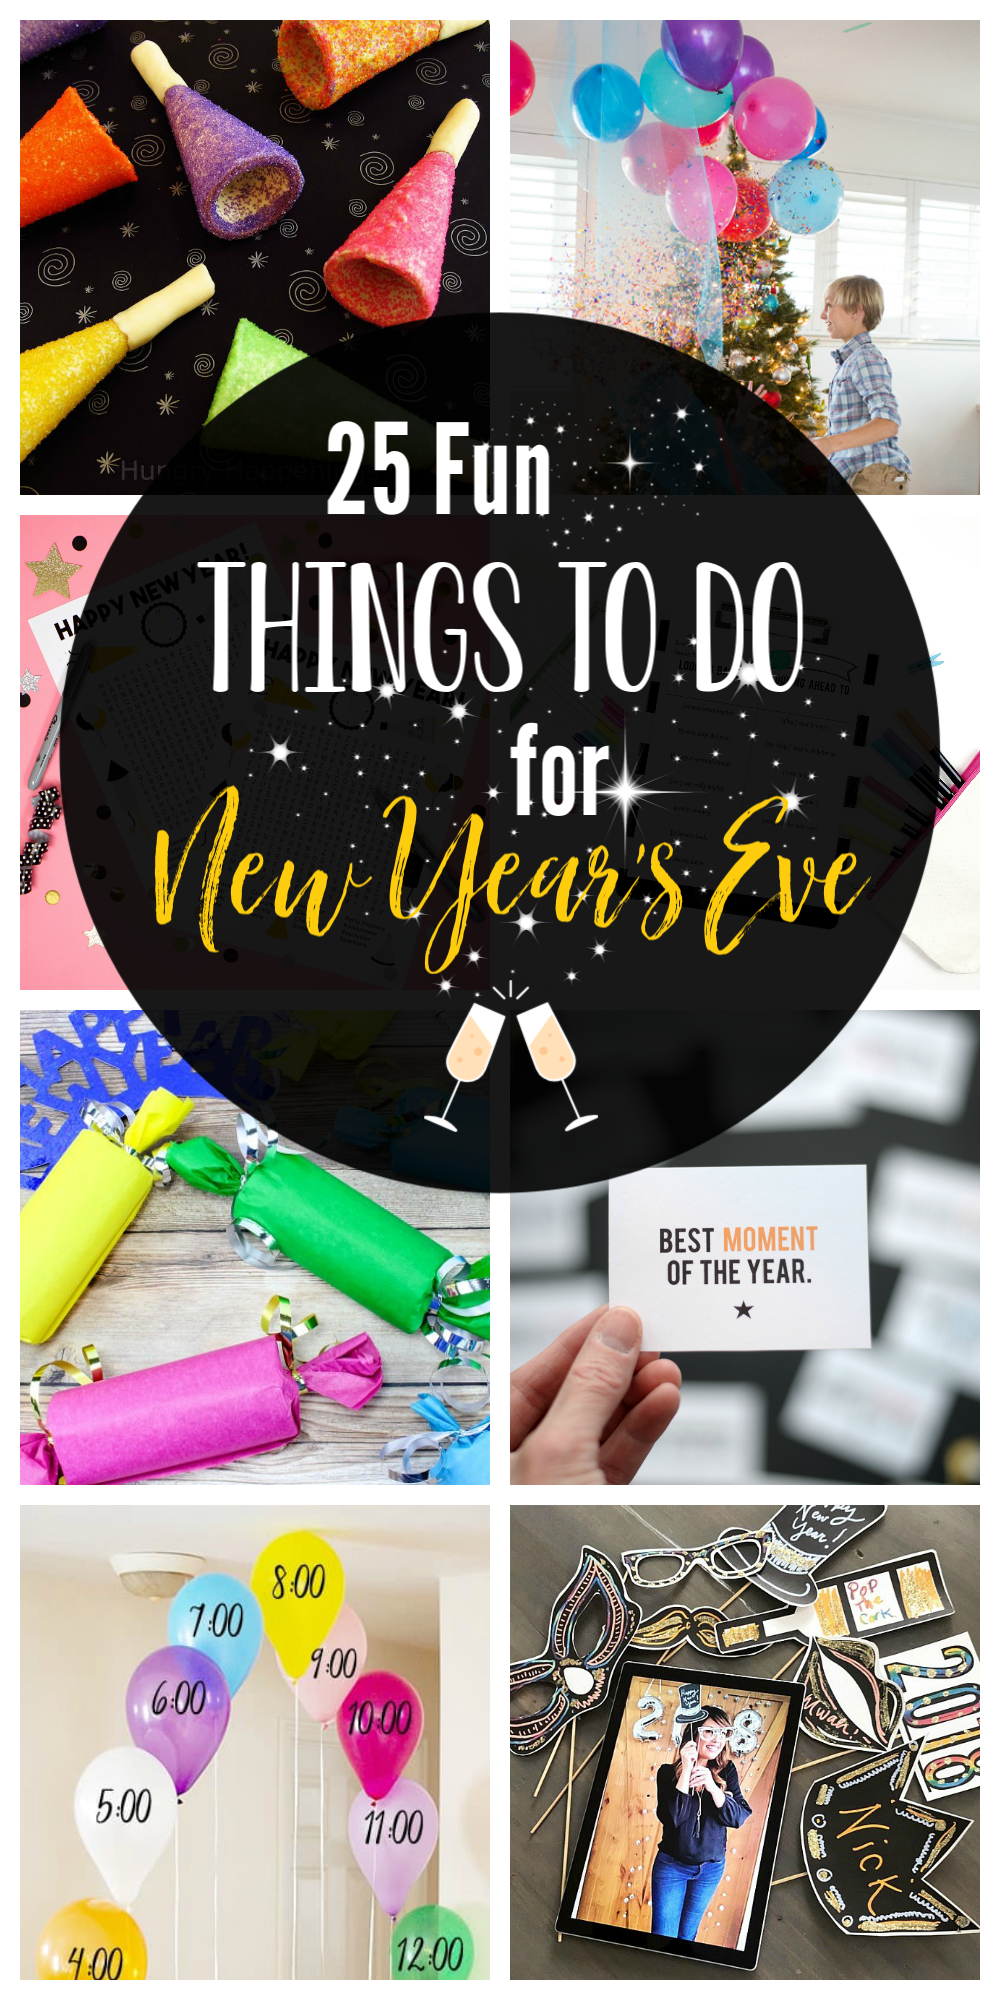 25 Fun Things to do for New Years Eve with Kids and Family at Home-Great New Year's Eve ideas from activities and games to countdowns and party favors. All kinds of fun for your New Year's Eve! #newyearseve #party